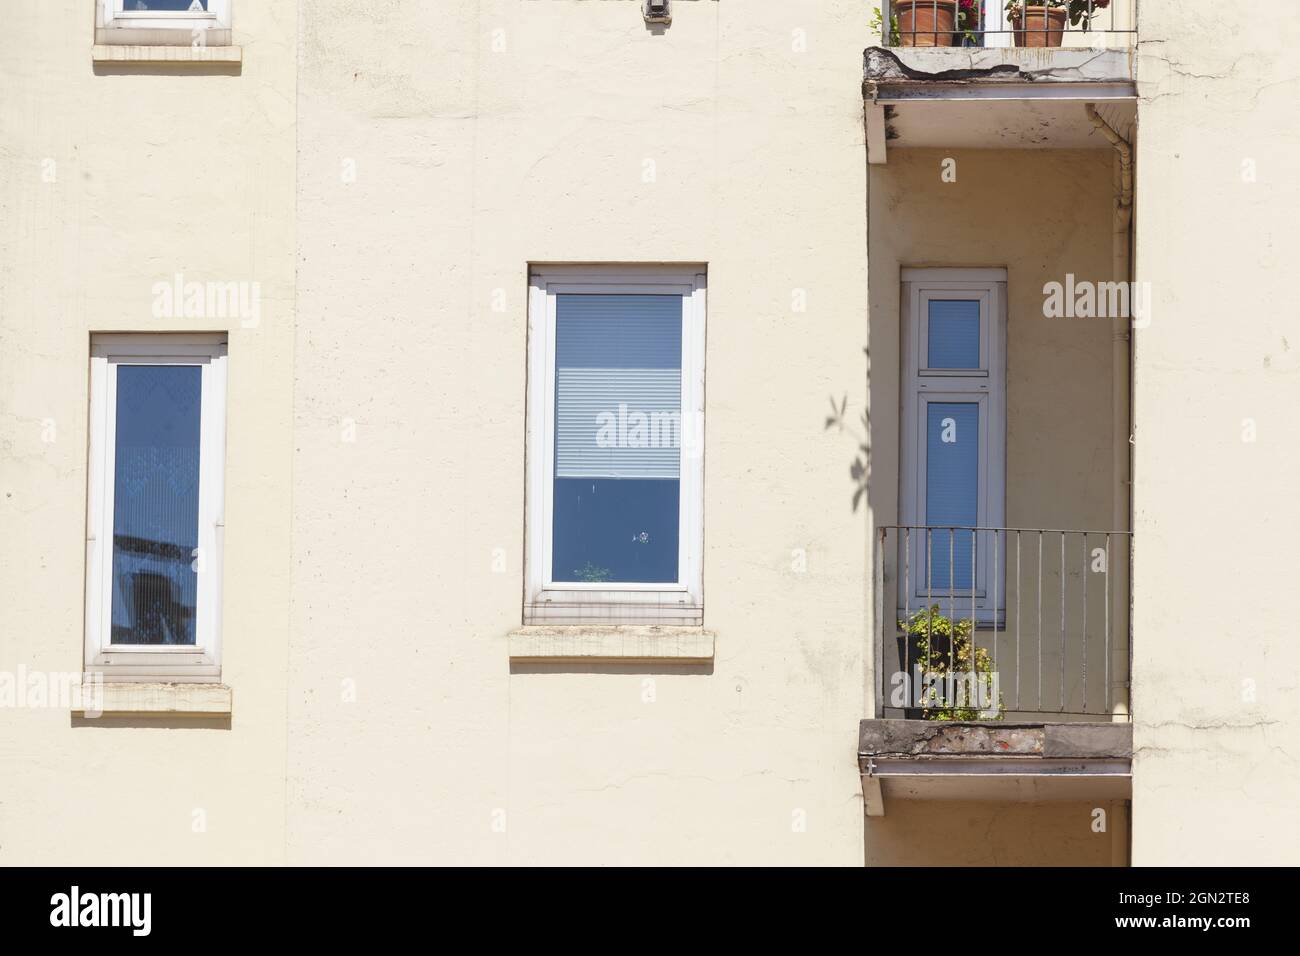 Page 2 - Altbau High Resolution Stock Photography and Images - Alamy